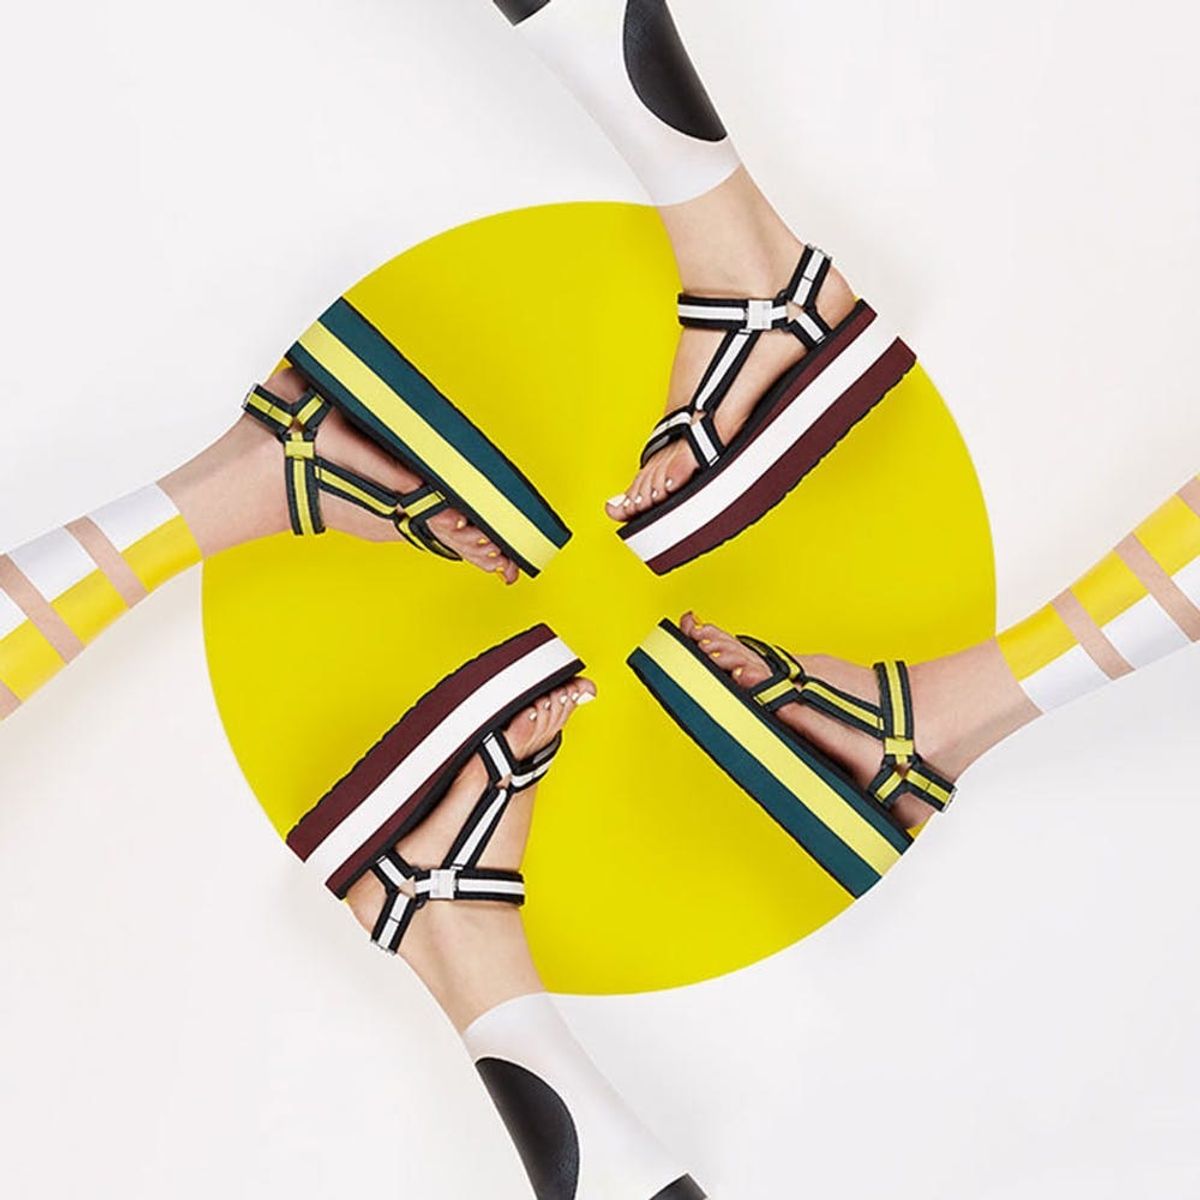 Opening Ceremony + Teva Just Designed Your Go-To Summer Sandals